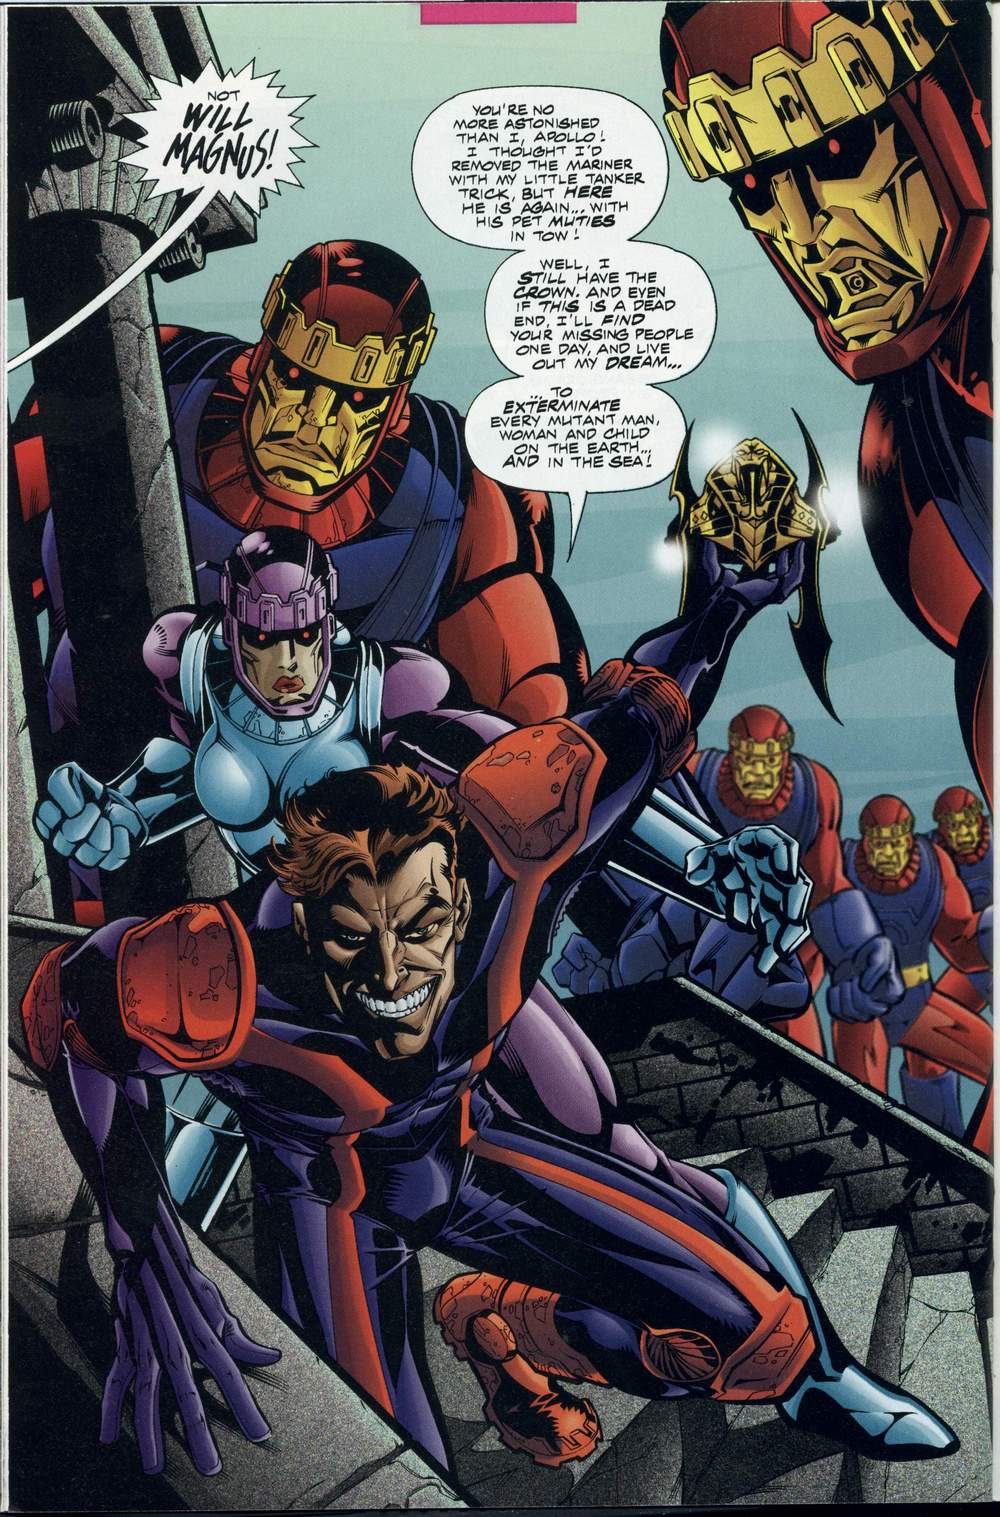 Will Magnus is ready to unleash his Sentinel army in JLX Vol. 1 #1 "A League of Their Own!" (1996), Marvel Comics/DC. Words by Mark Waid and Gerard Jones, art by Howard Porter, John Dell, Gloria Vasquez, and Chris Eliopoulous.